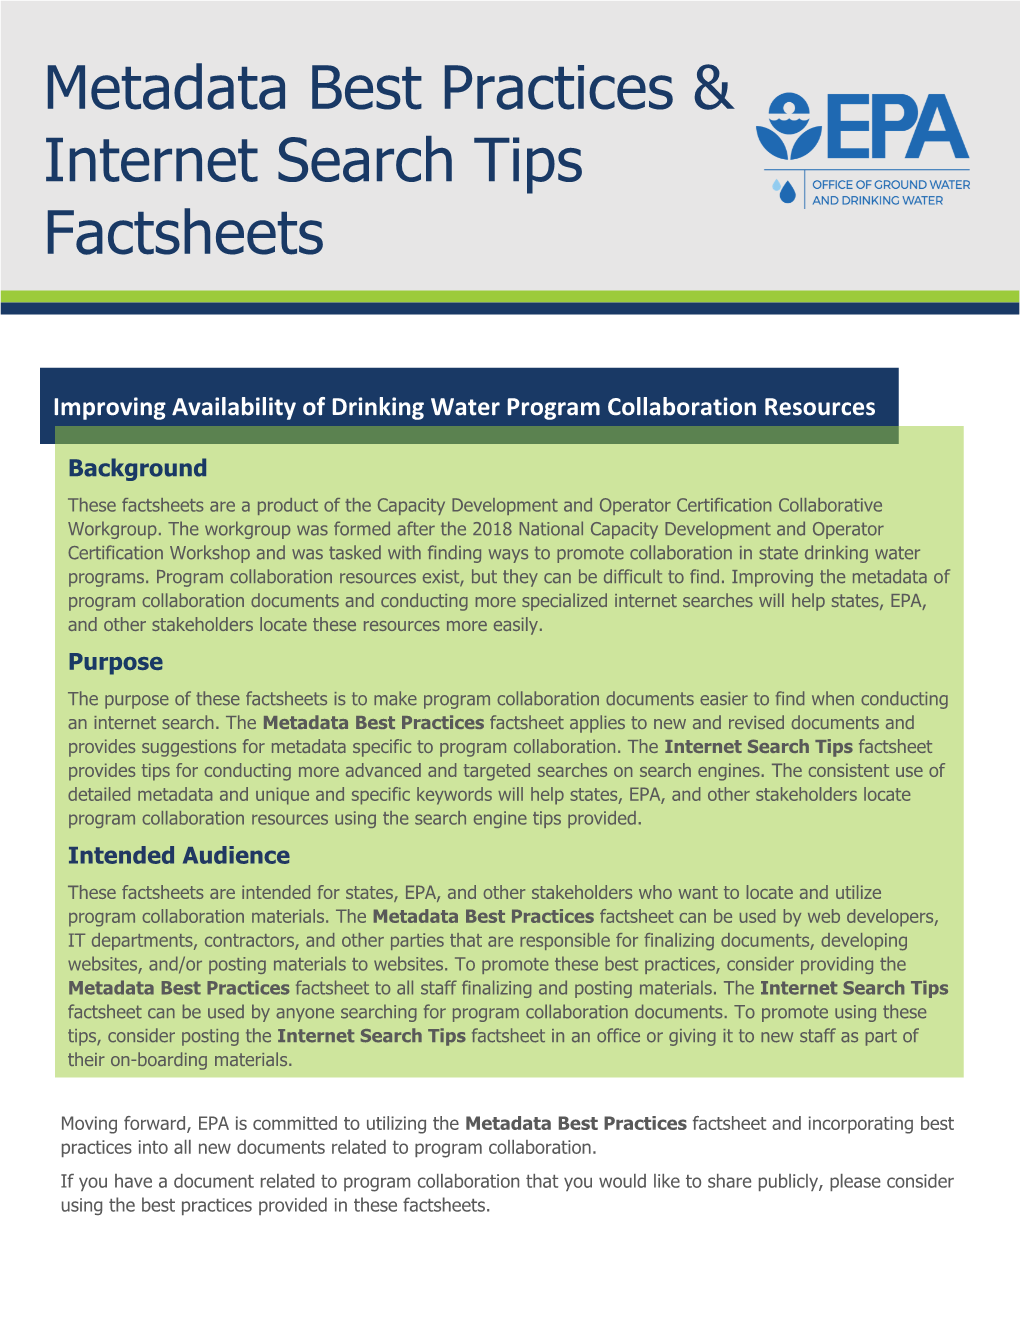 Metadata Best Practices and Internet Search Tips Factsheet